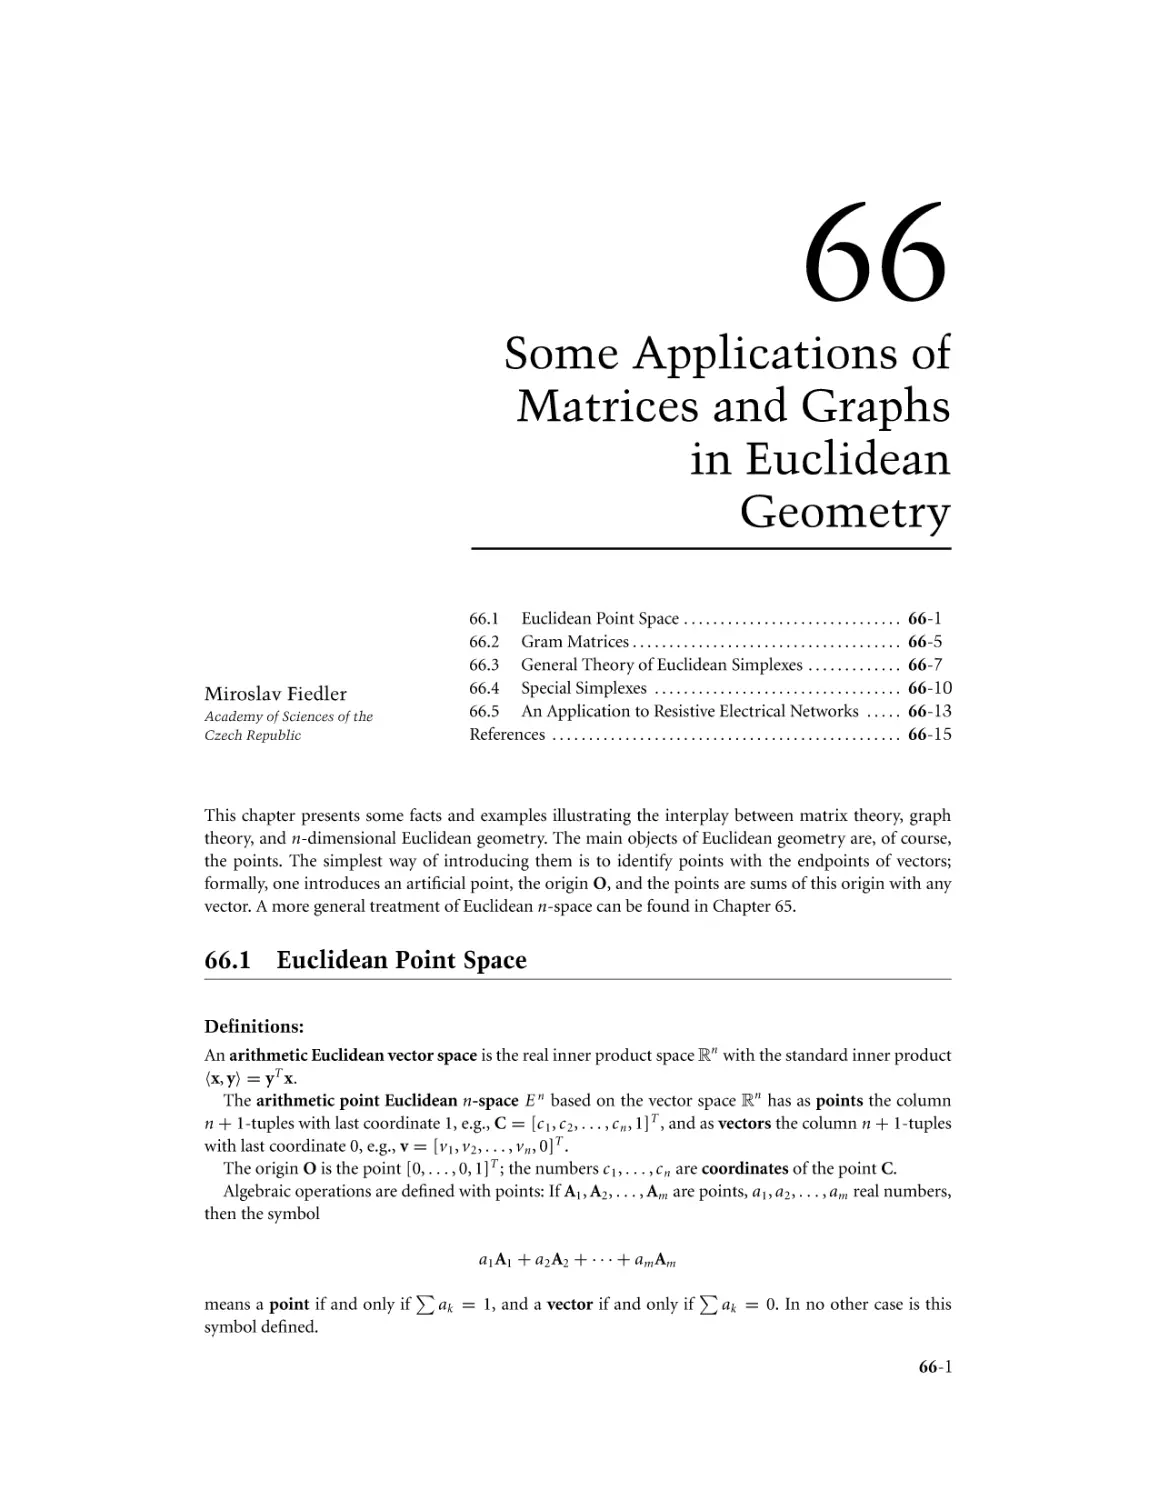 Chapter 66. Some Applications of Matrices and Graphs in Euclidean Geometry